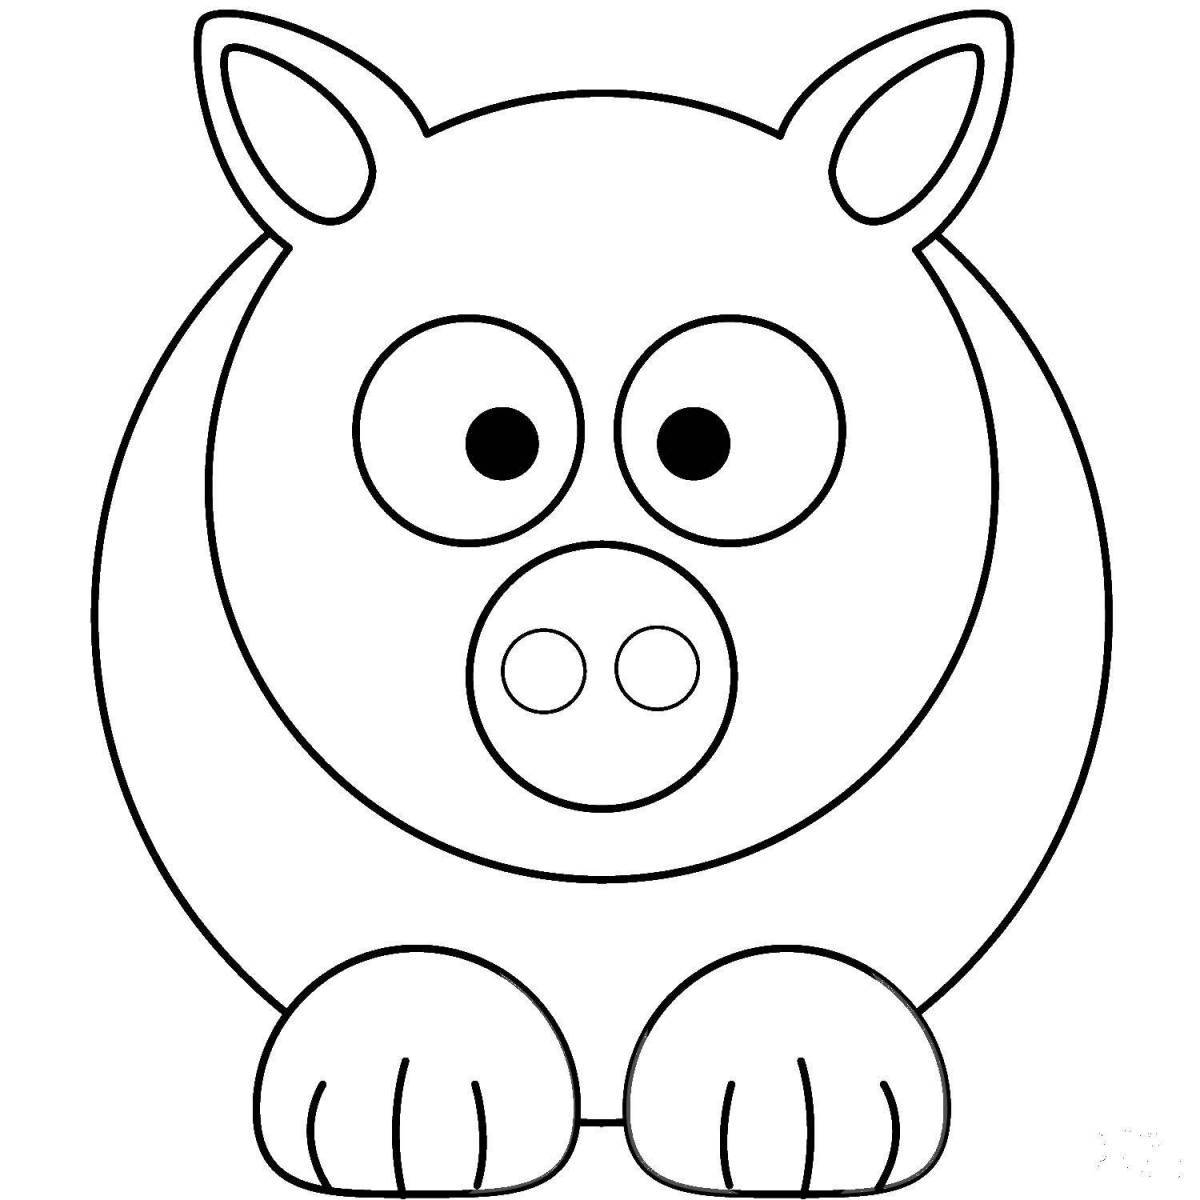 Pig coloring page